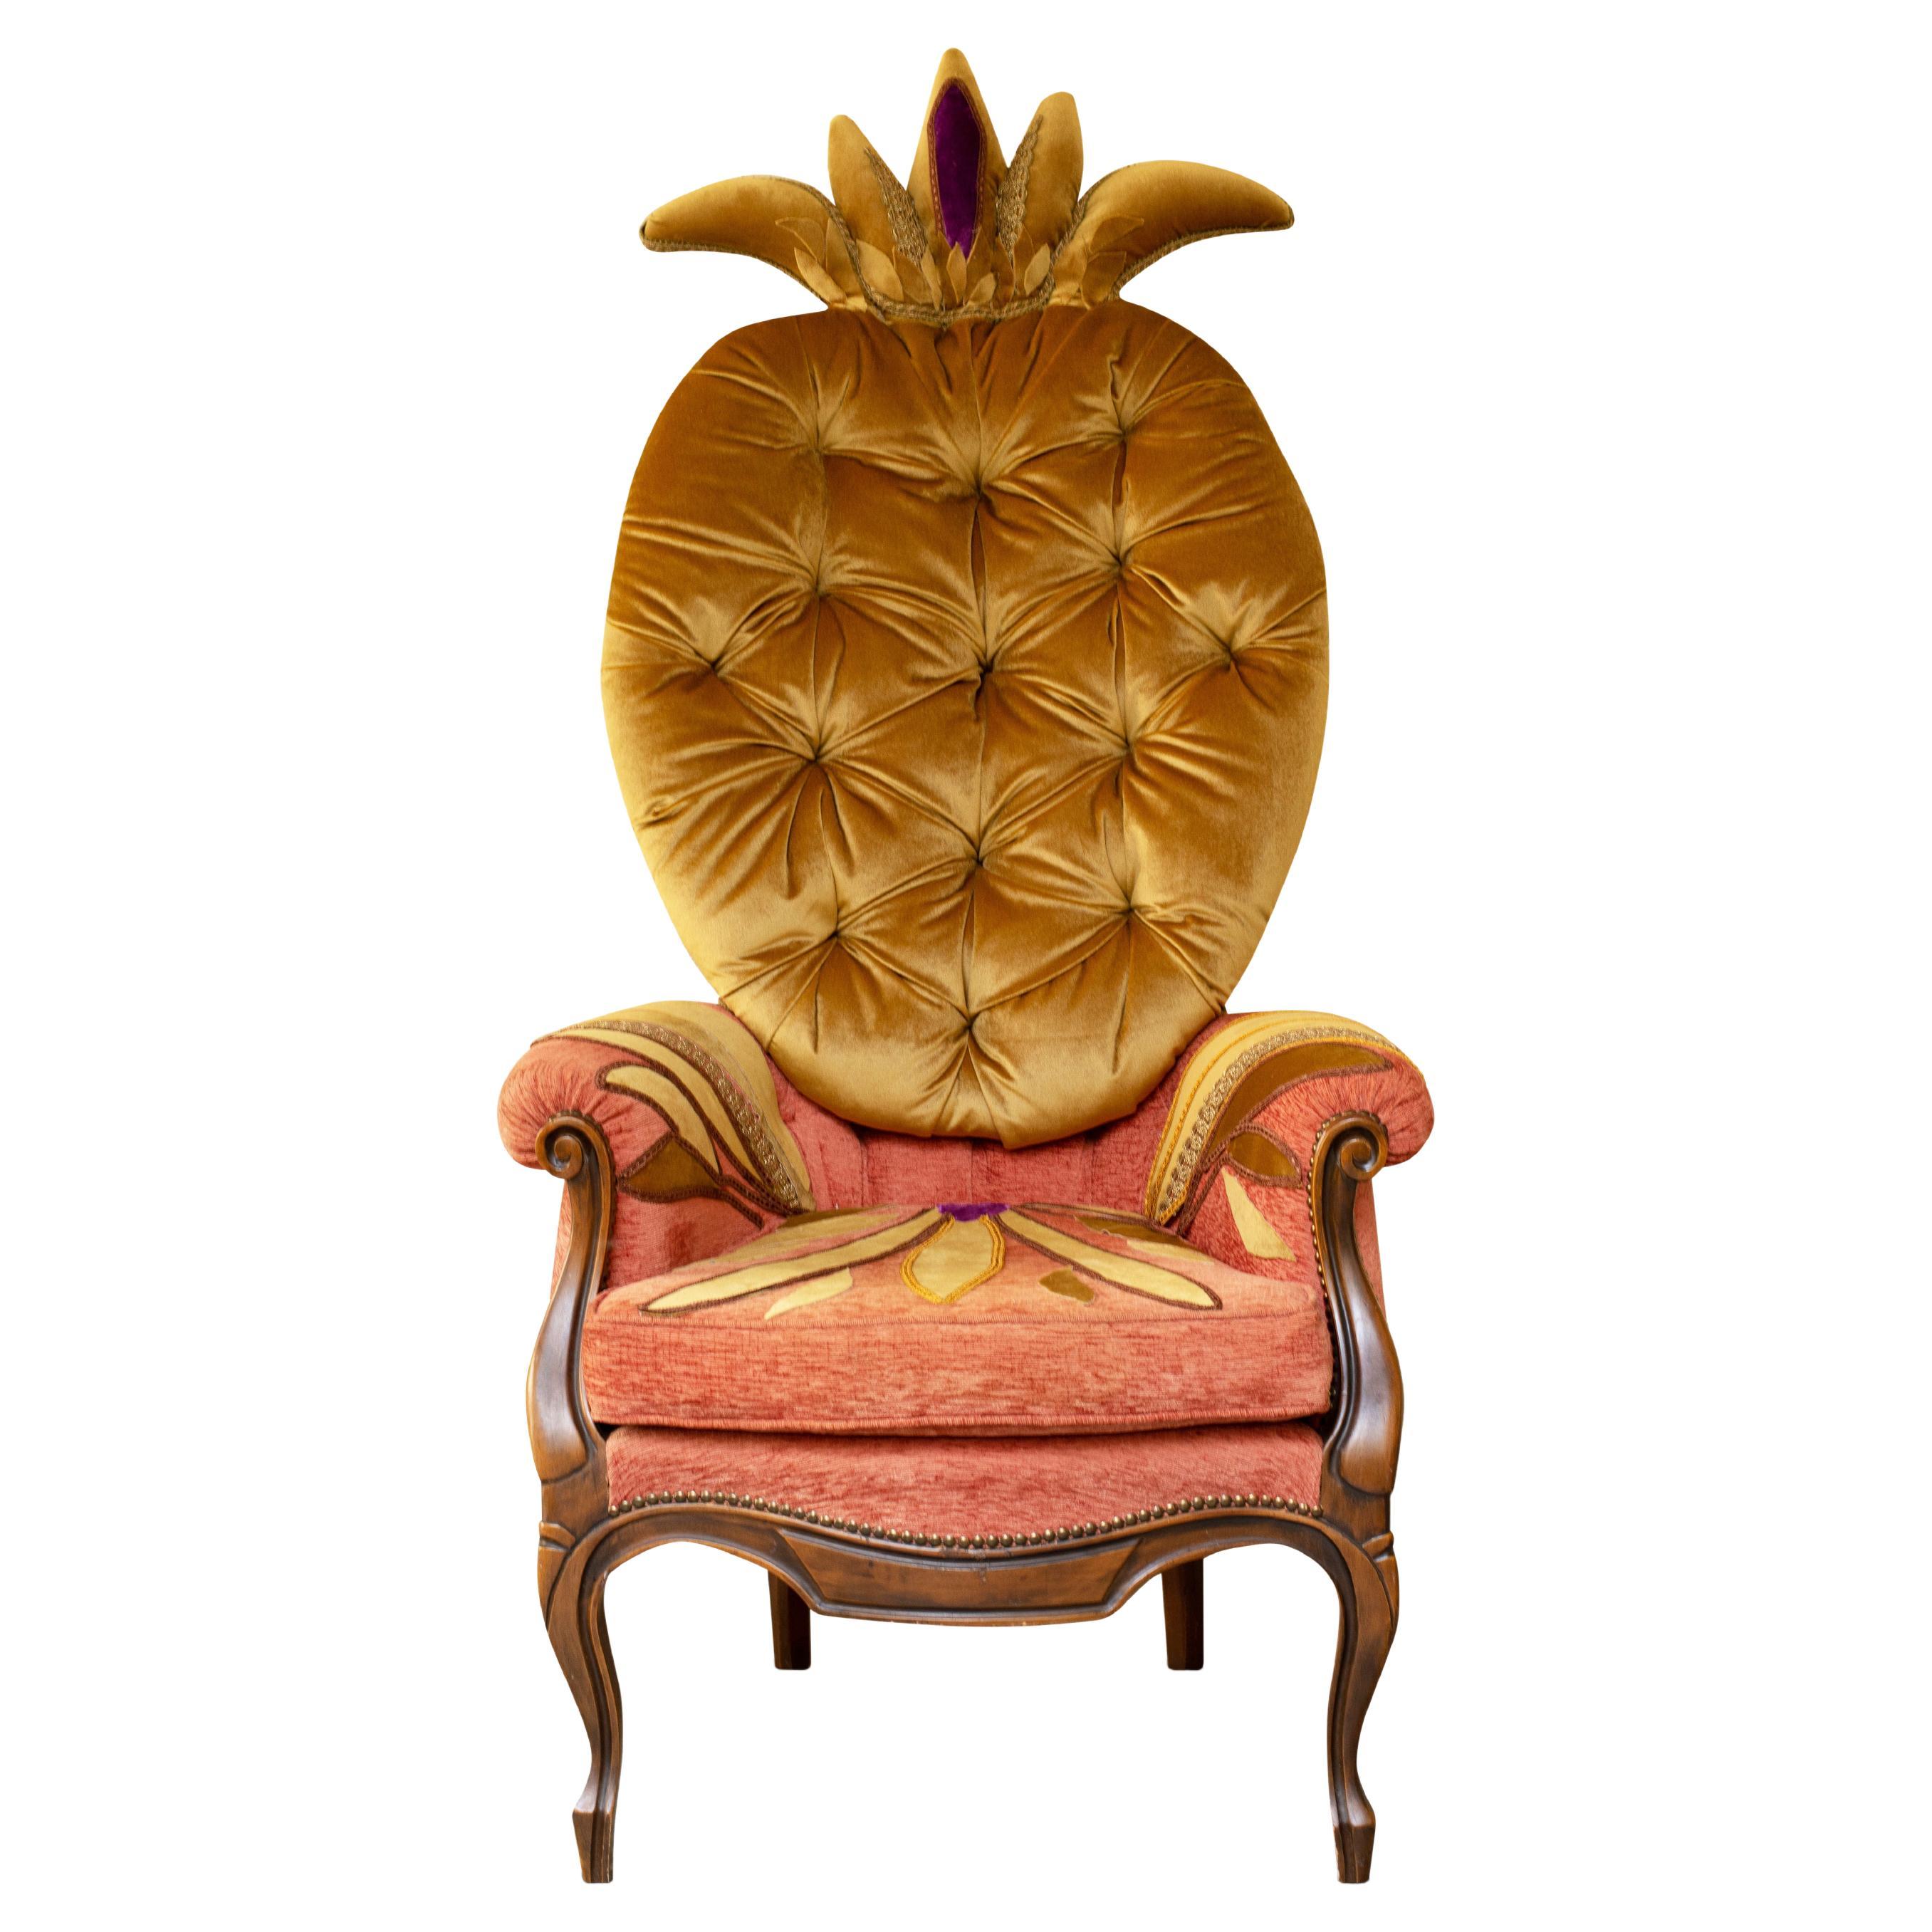 Fauteuil d'art contemporain - Yellow Pineapple by Carla Tolomeo